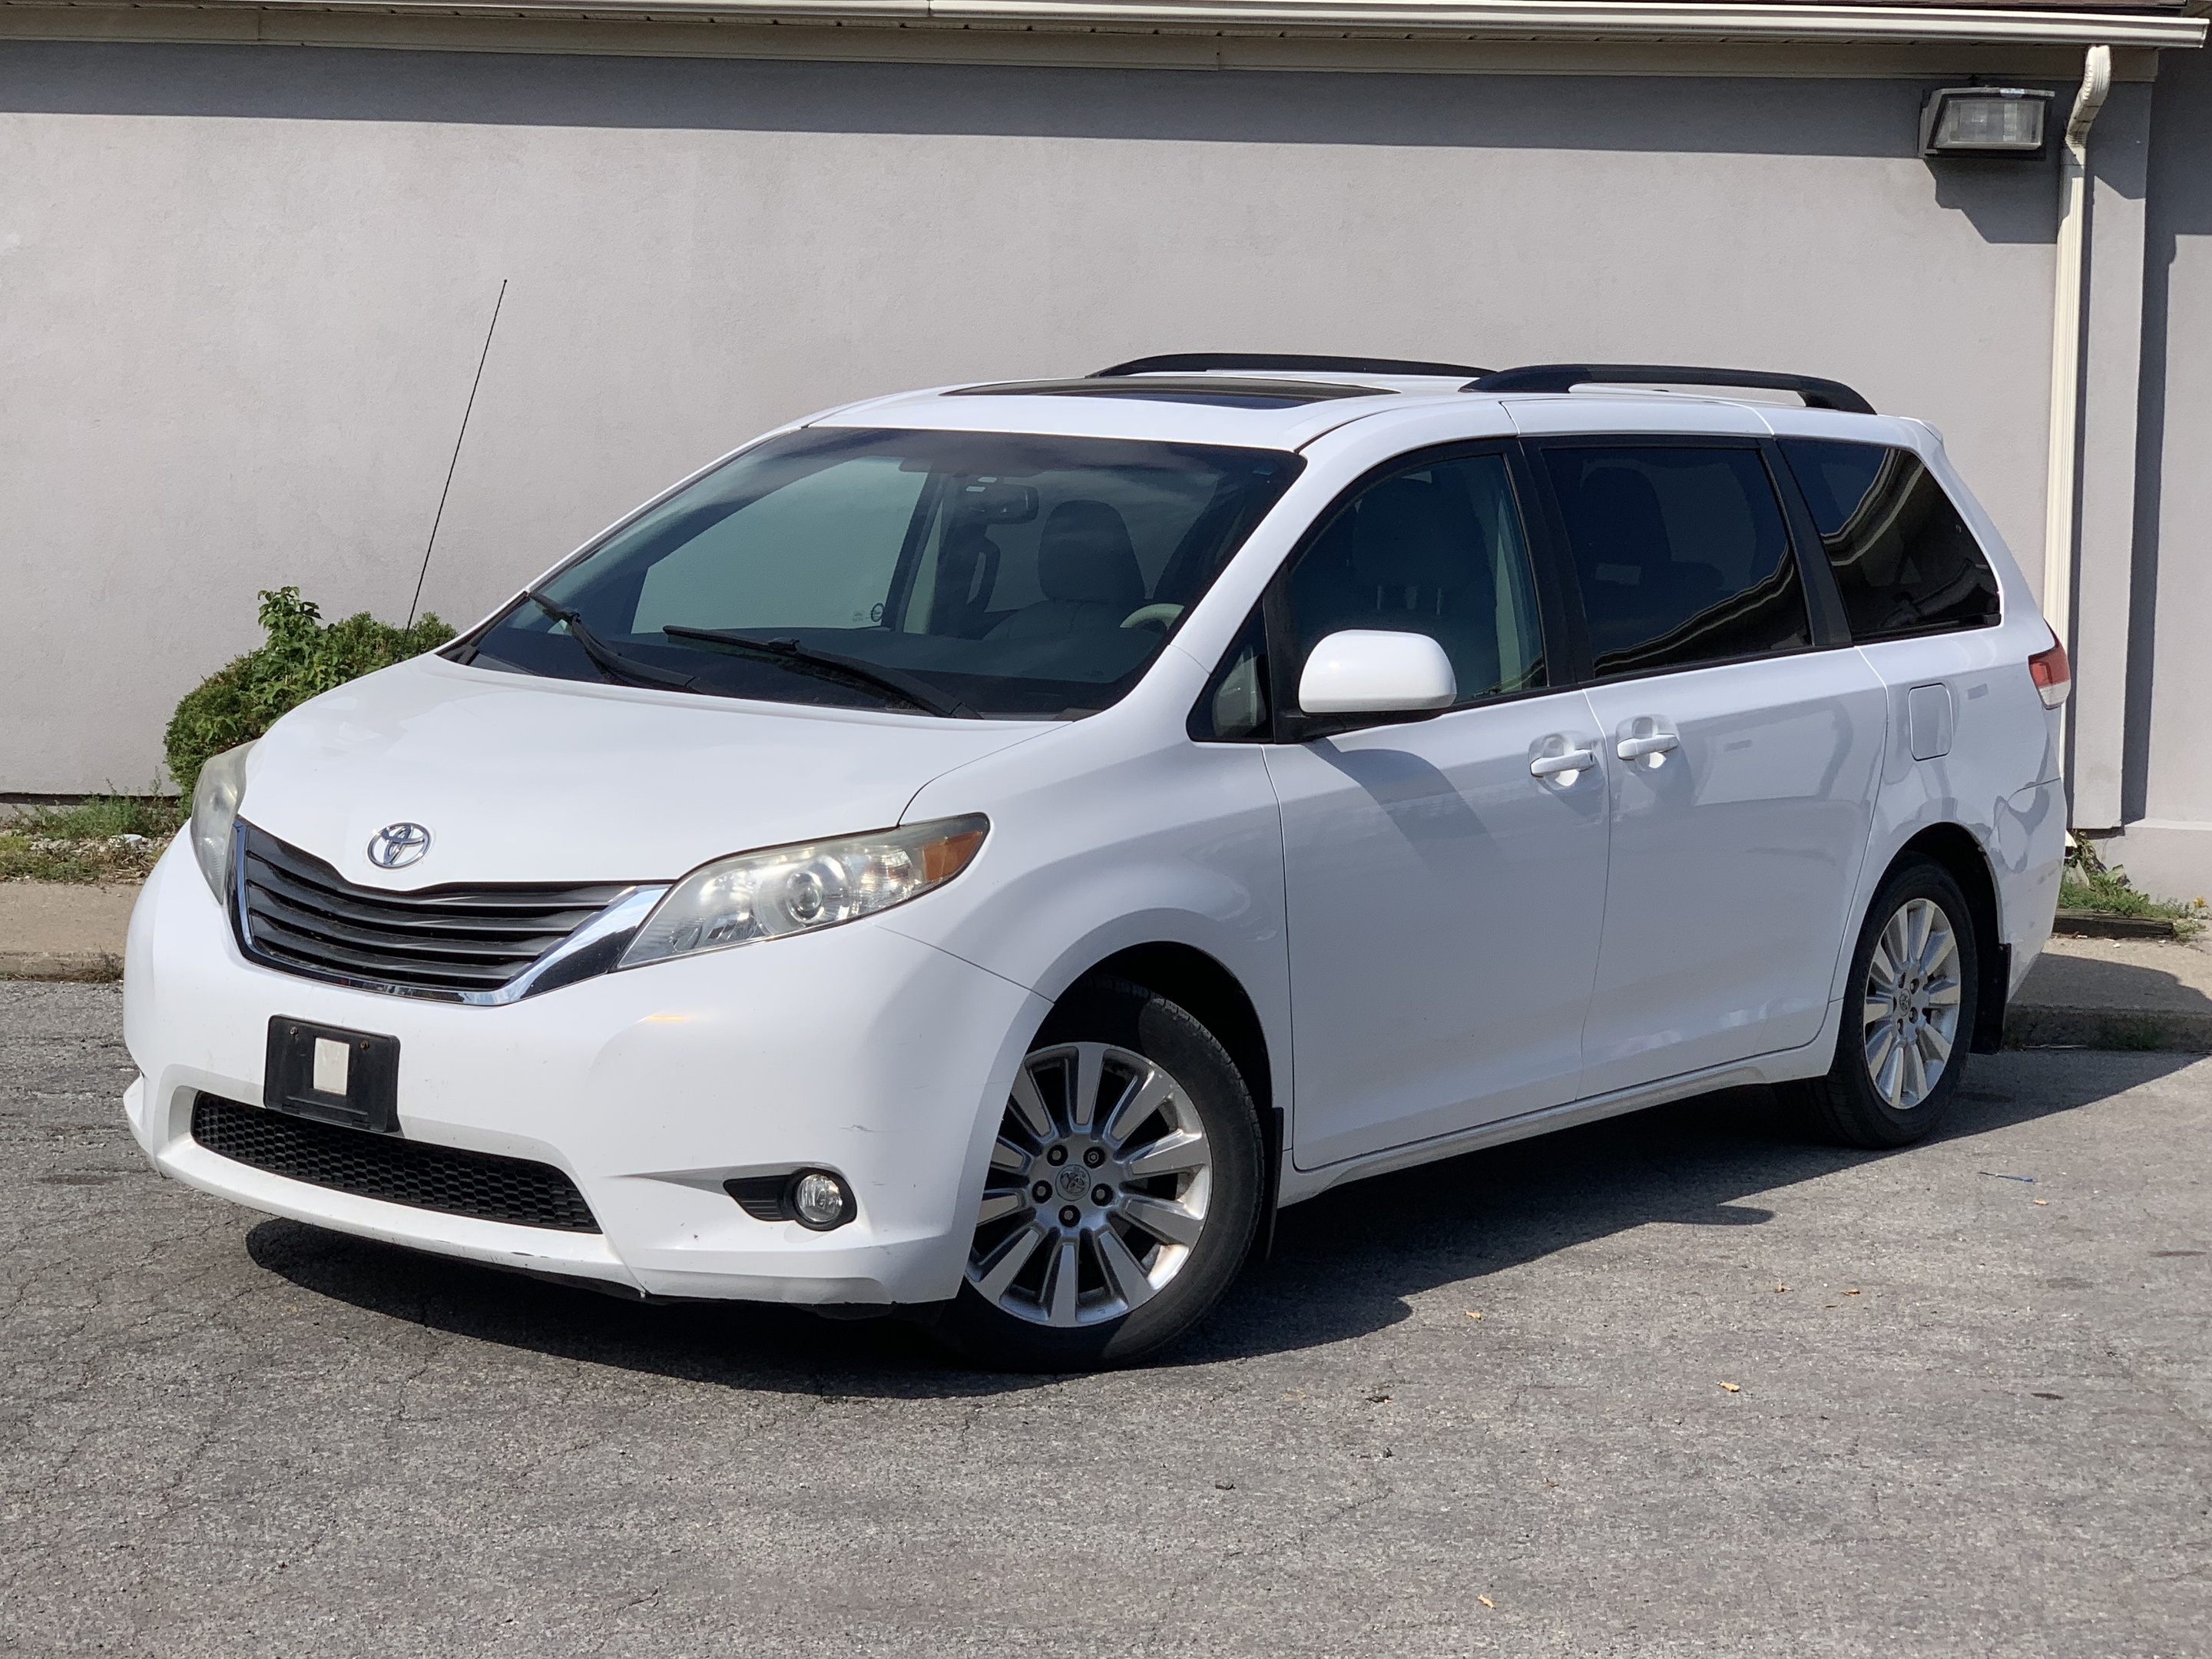 2012 Toyota Sienna 5dr V6 XLE 7-Pass   Captian Seat   Clean Carfax